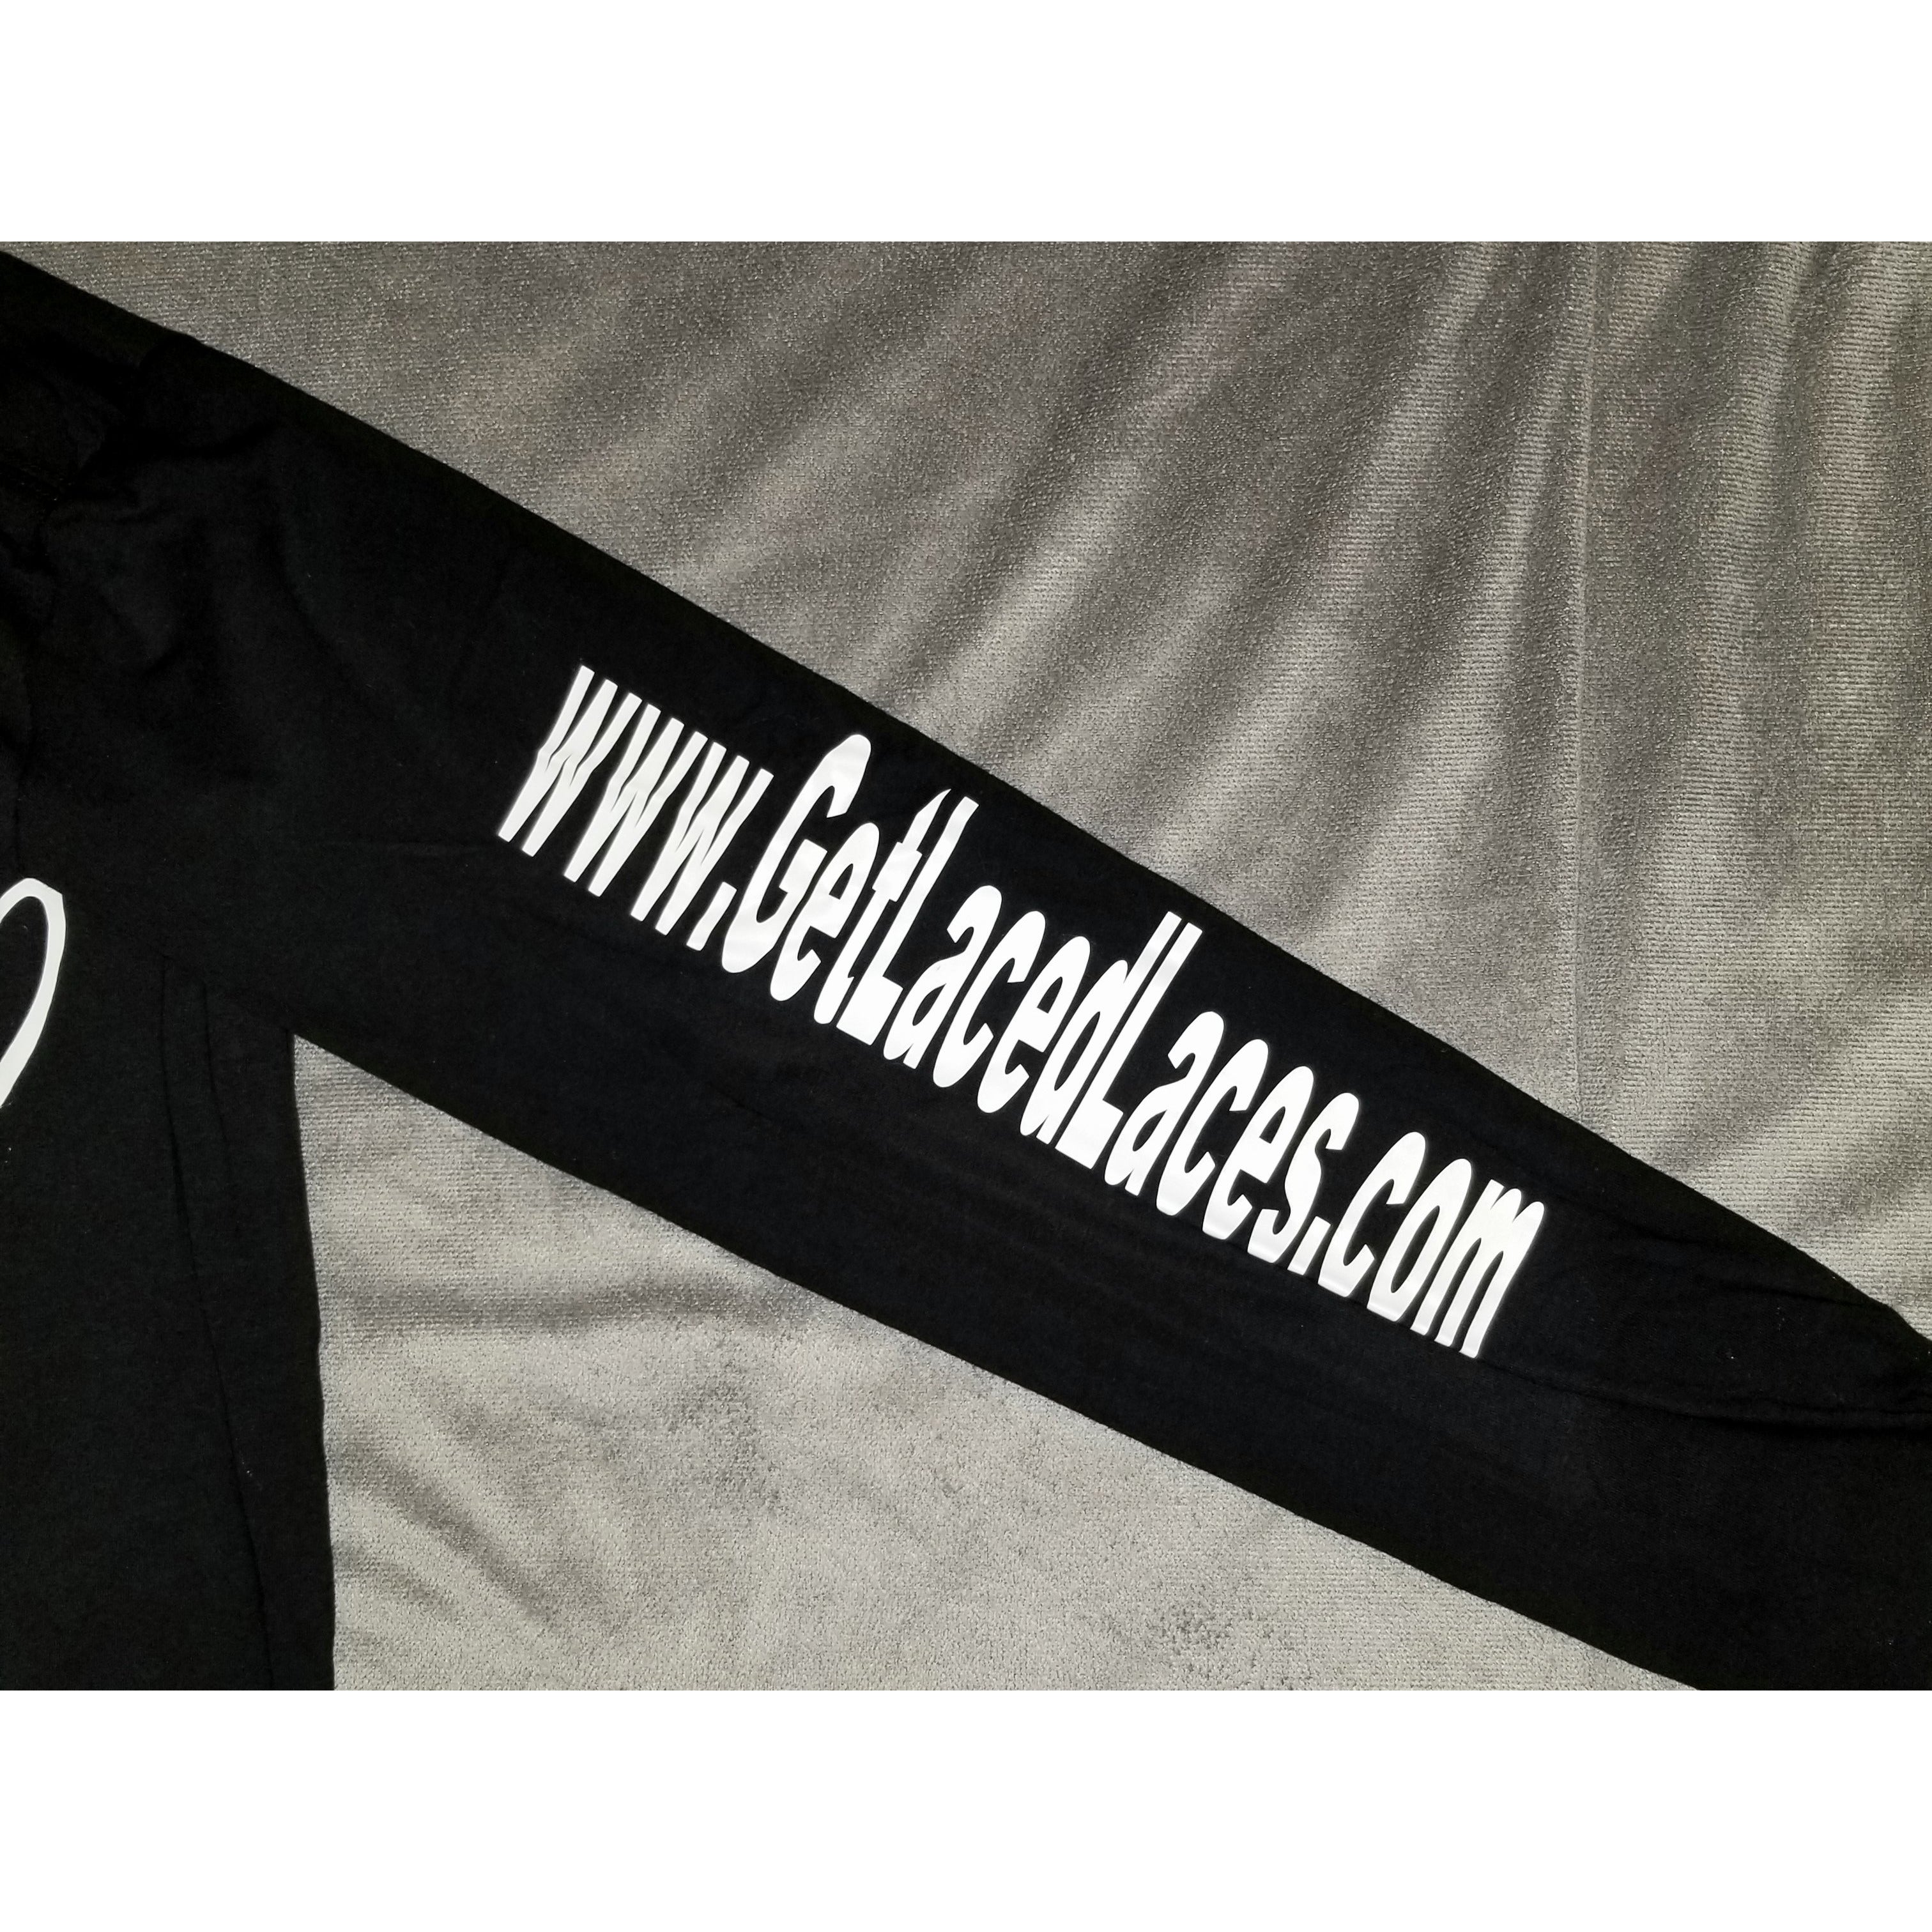 Get Laced Team Long Sleeve Tee Shirt - Get Laced Laces